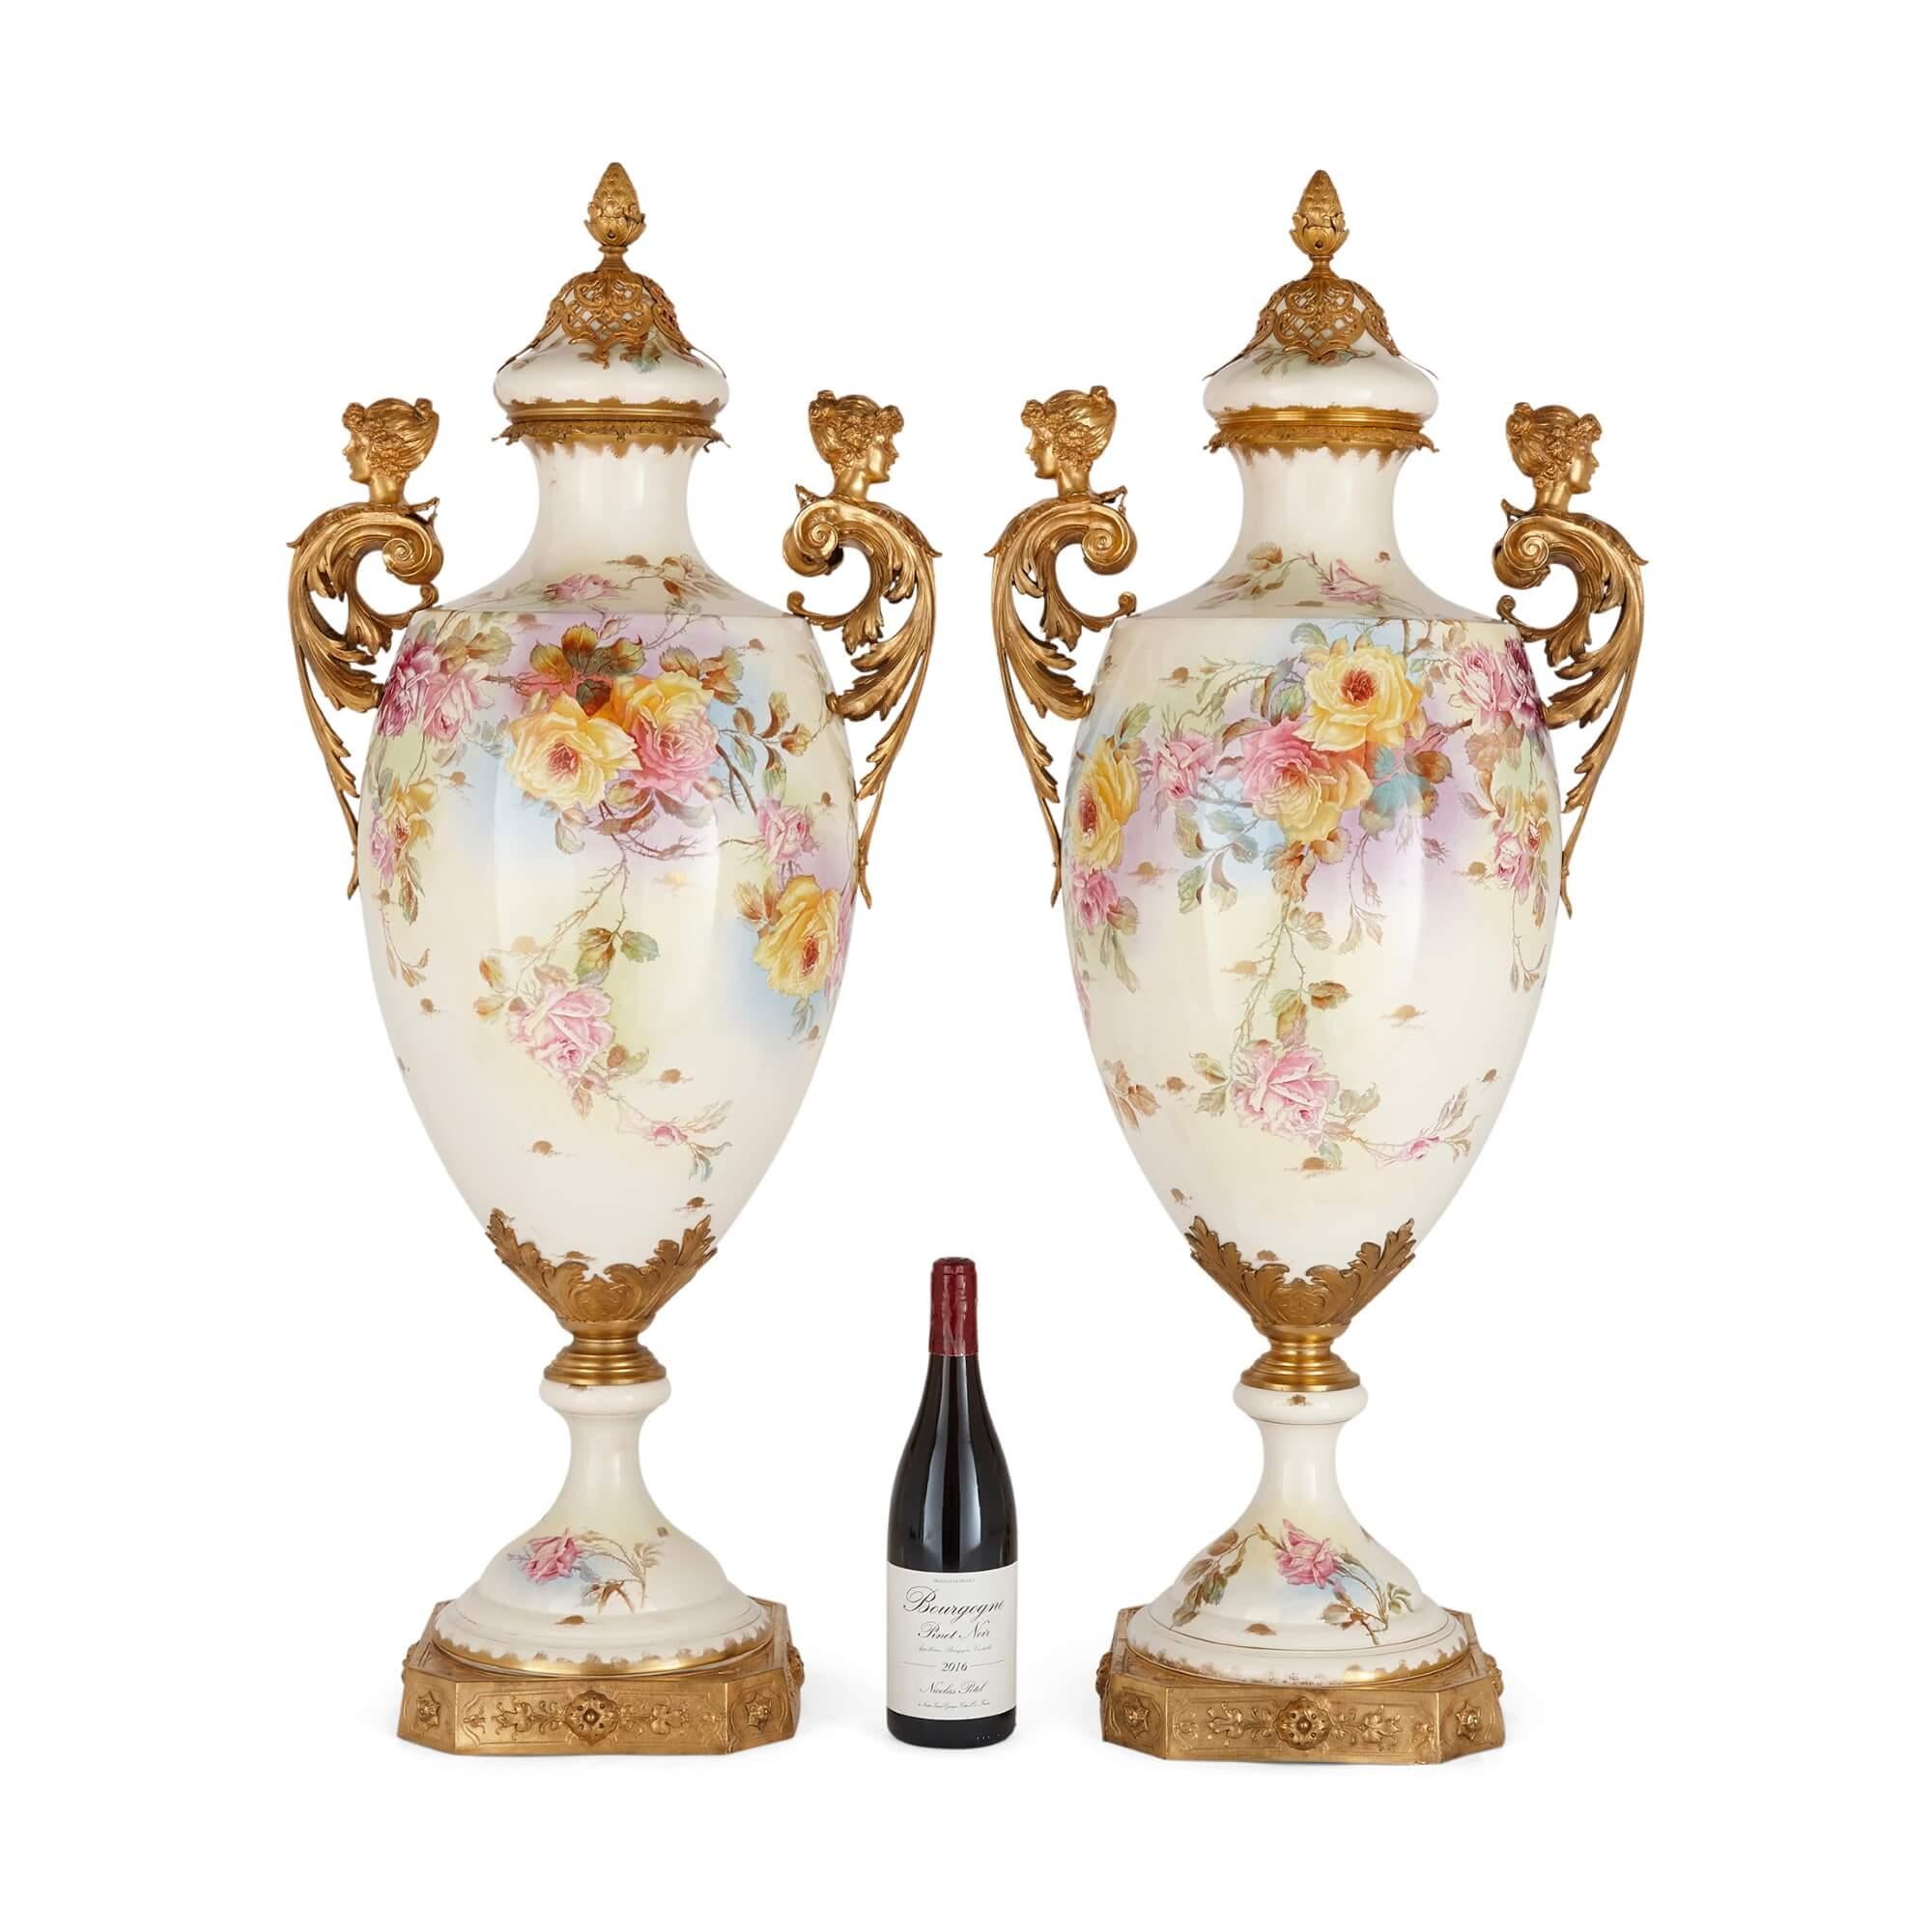 Pair of Large Sèvres-style Porcelain and Gilt-Metal Vases For Sale 1